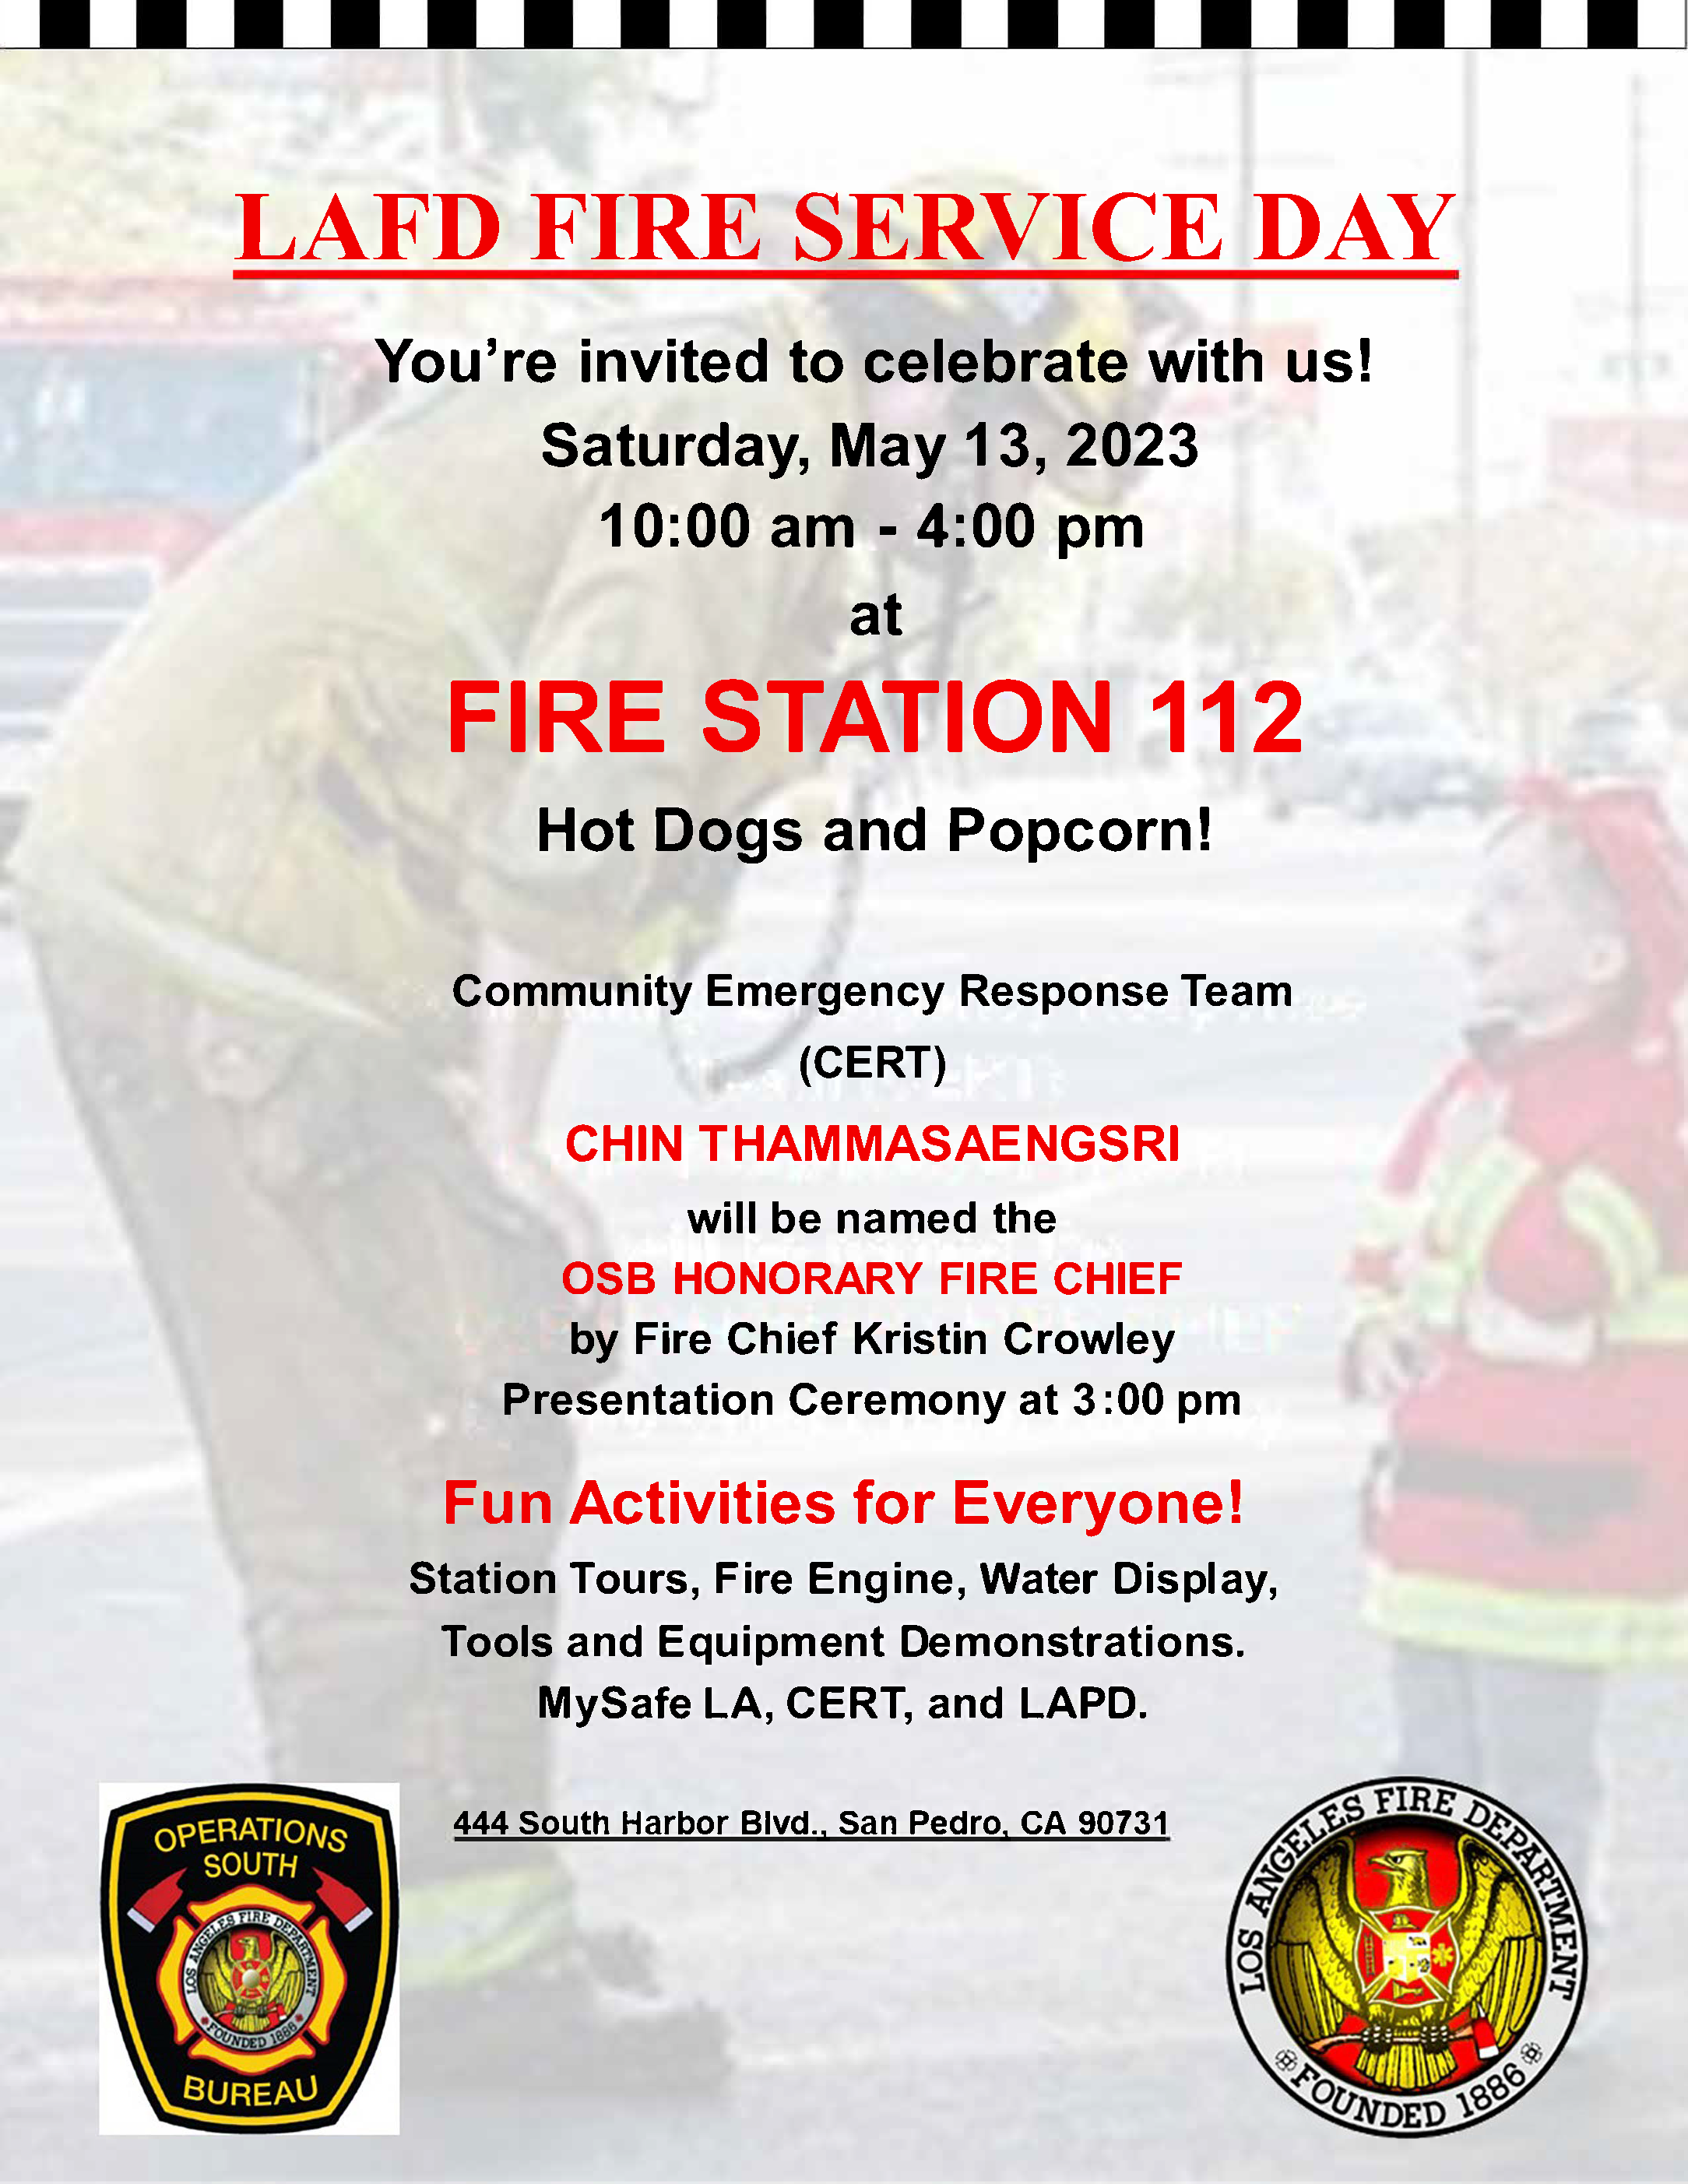 LAFD Fire Station 112 Fire Service Day Flyer